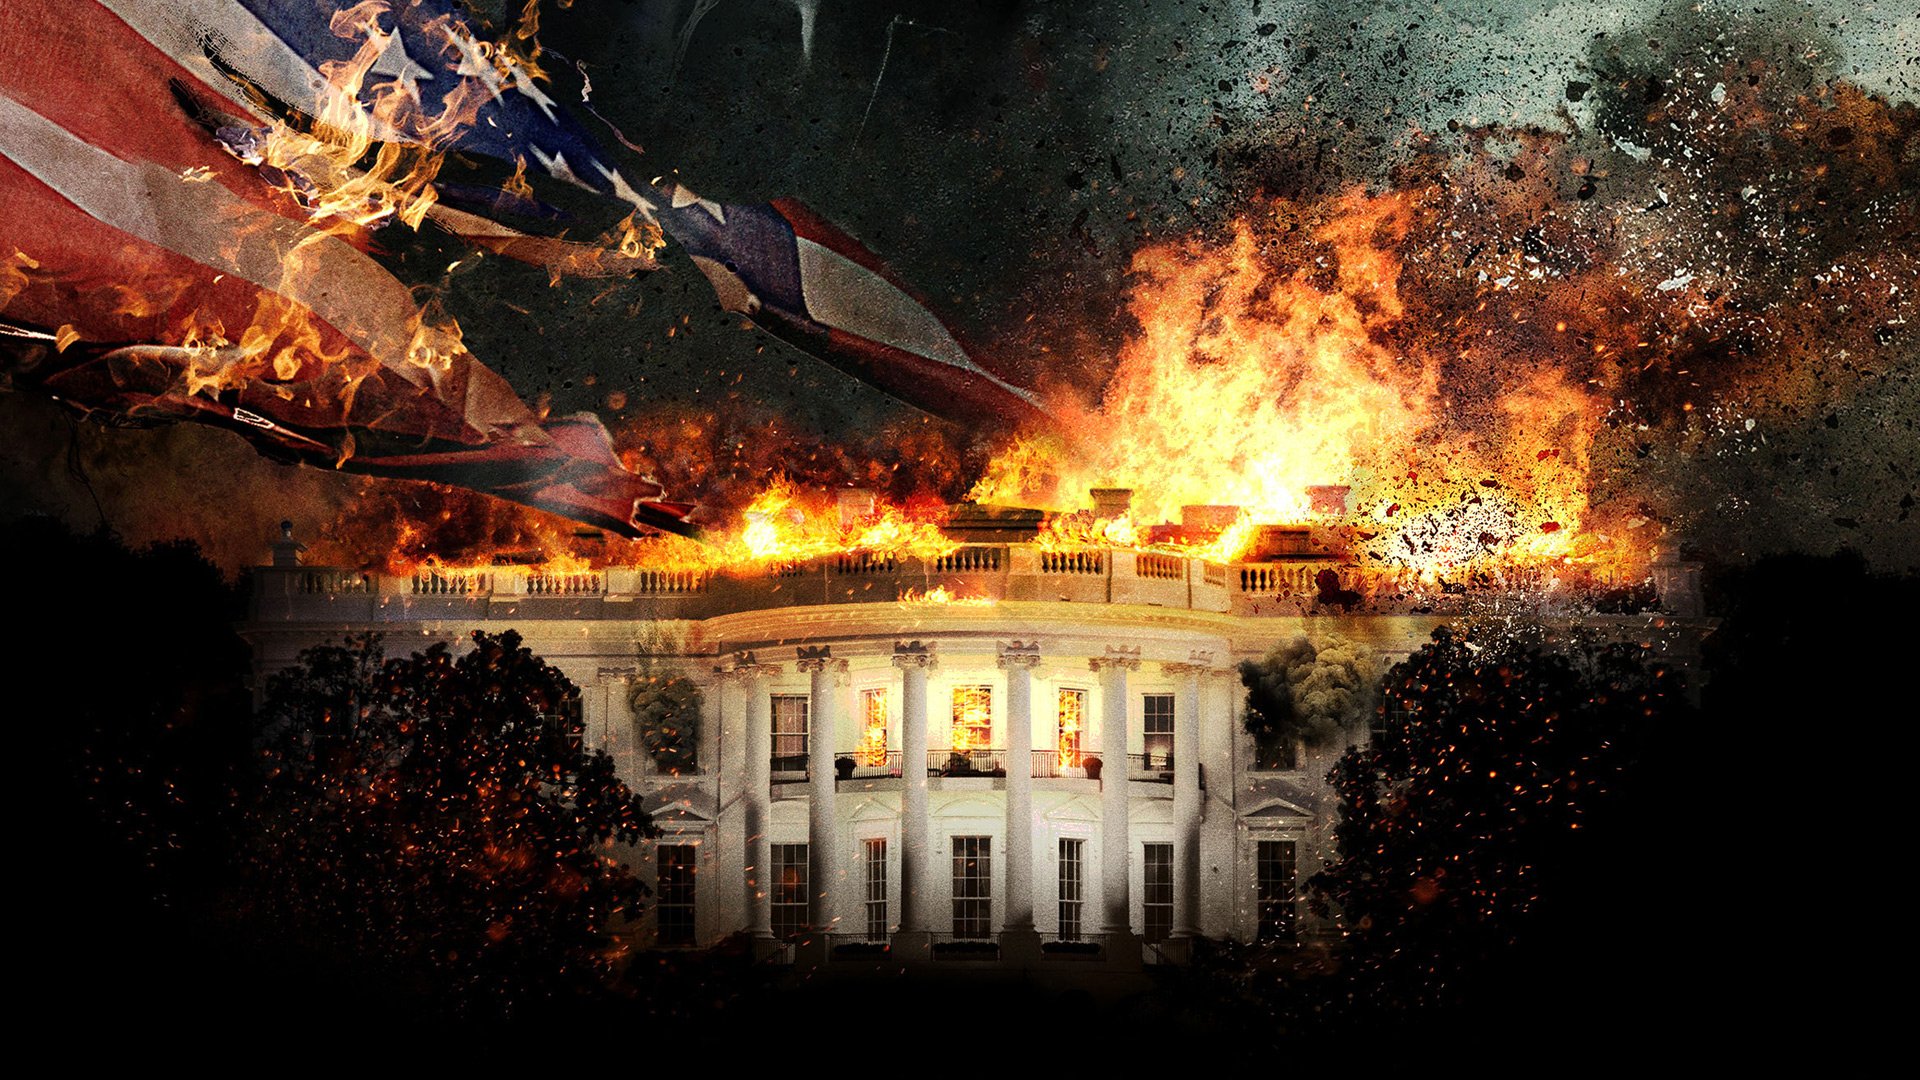 London Has Fallen Wallpaper HD Background Of Your Choice